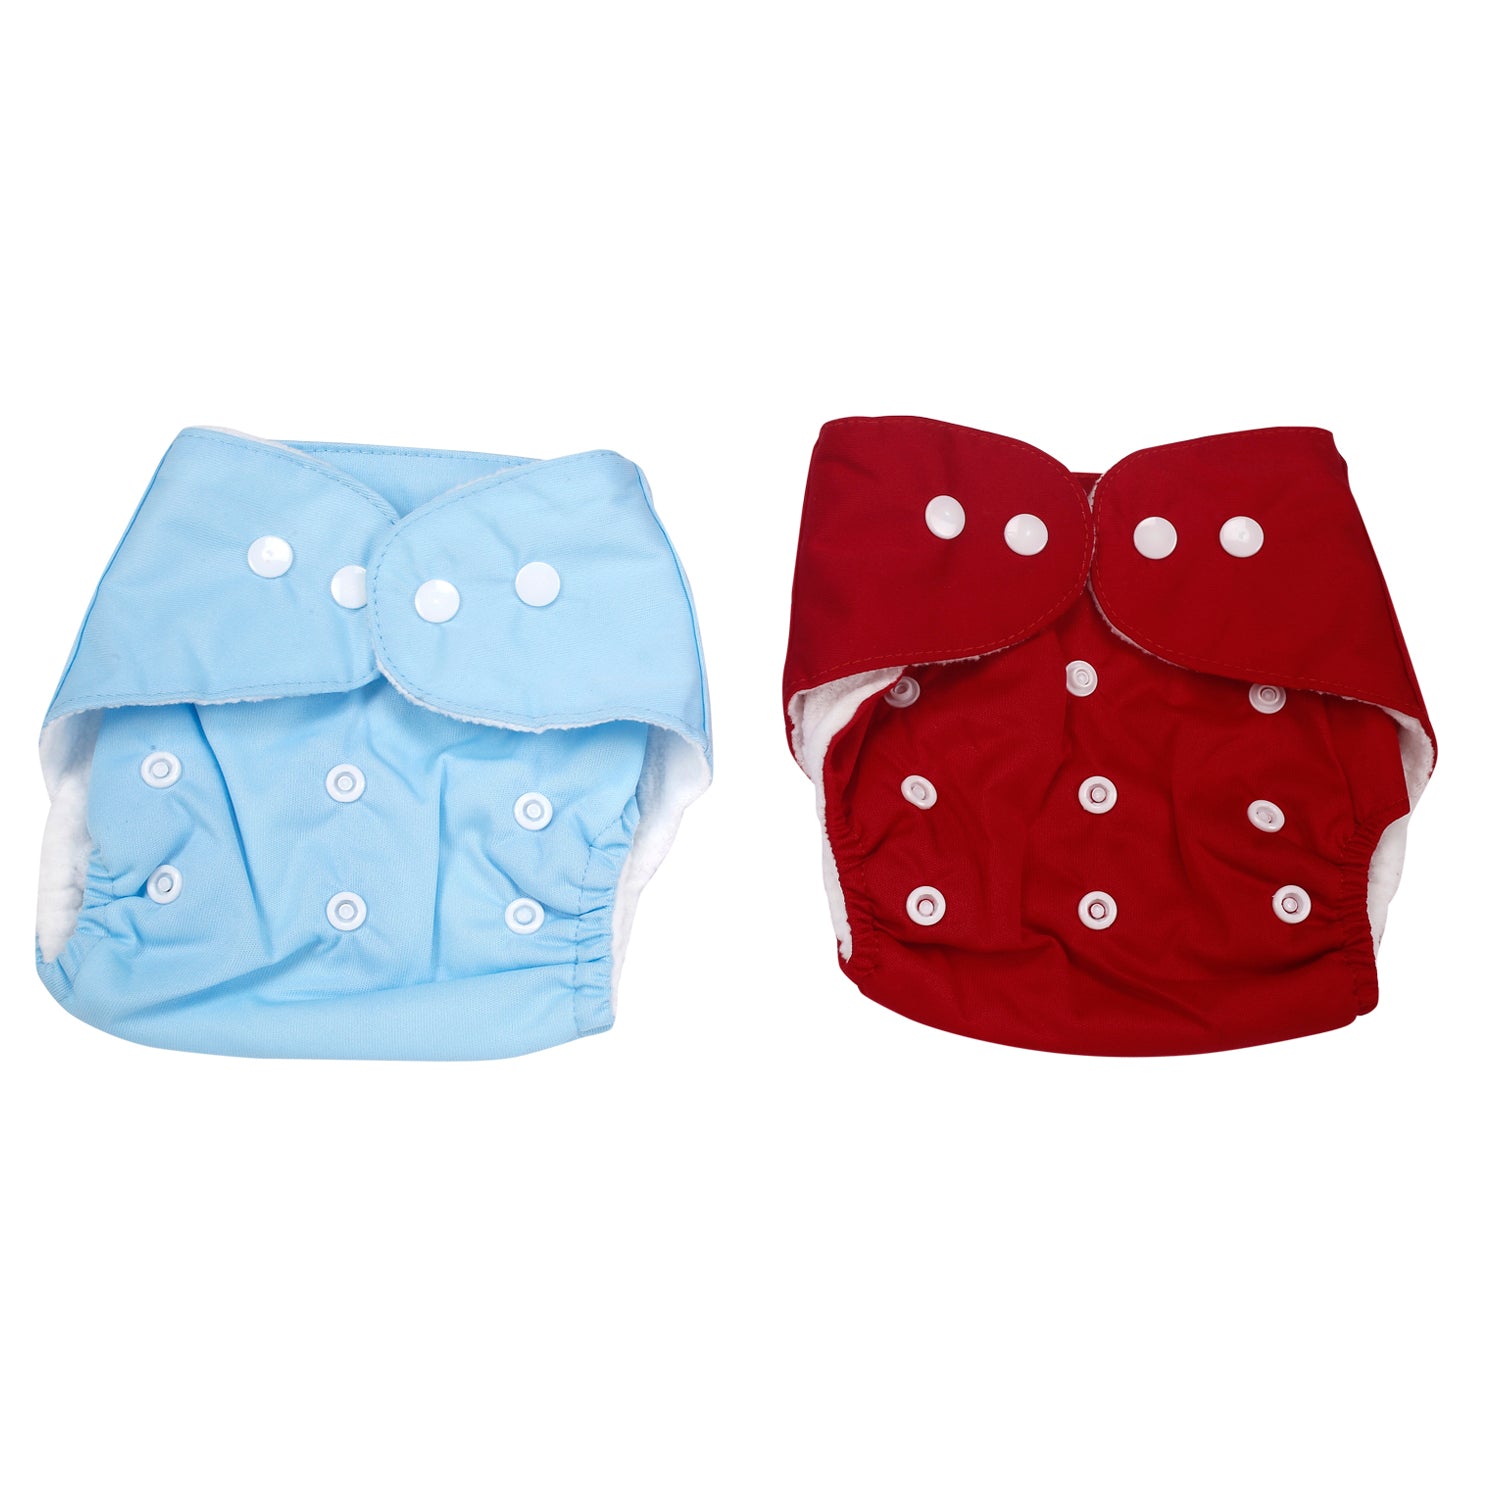 Plain Red And Blue Reusable 2 Pk Diaper - Baby Moo